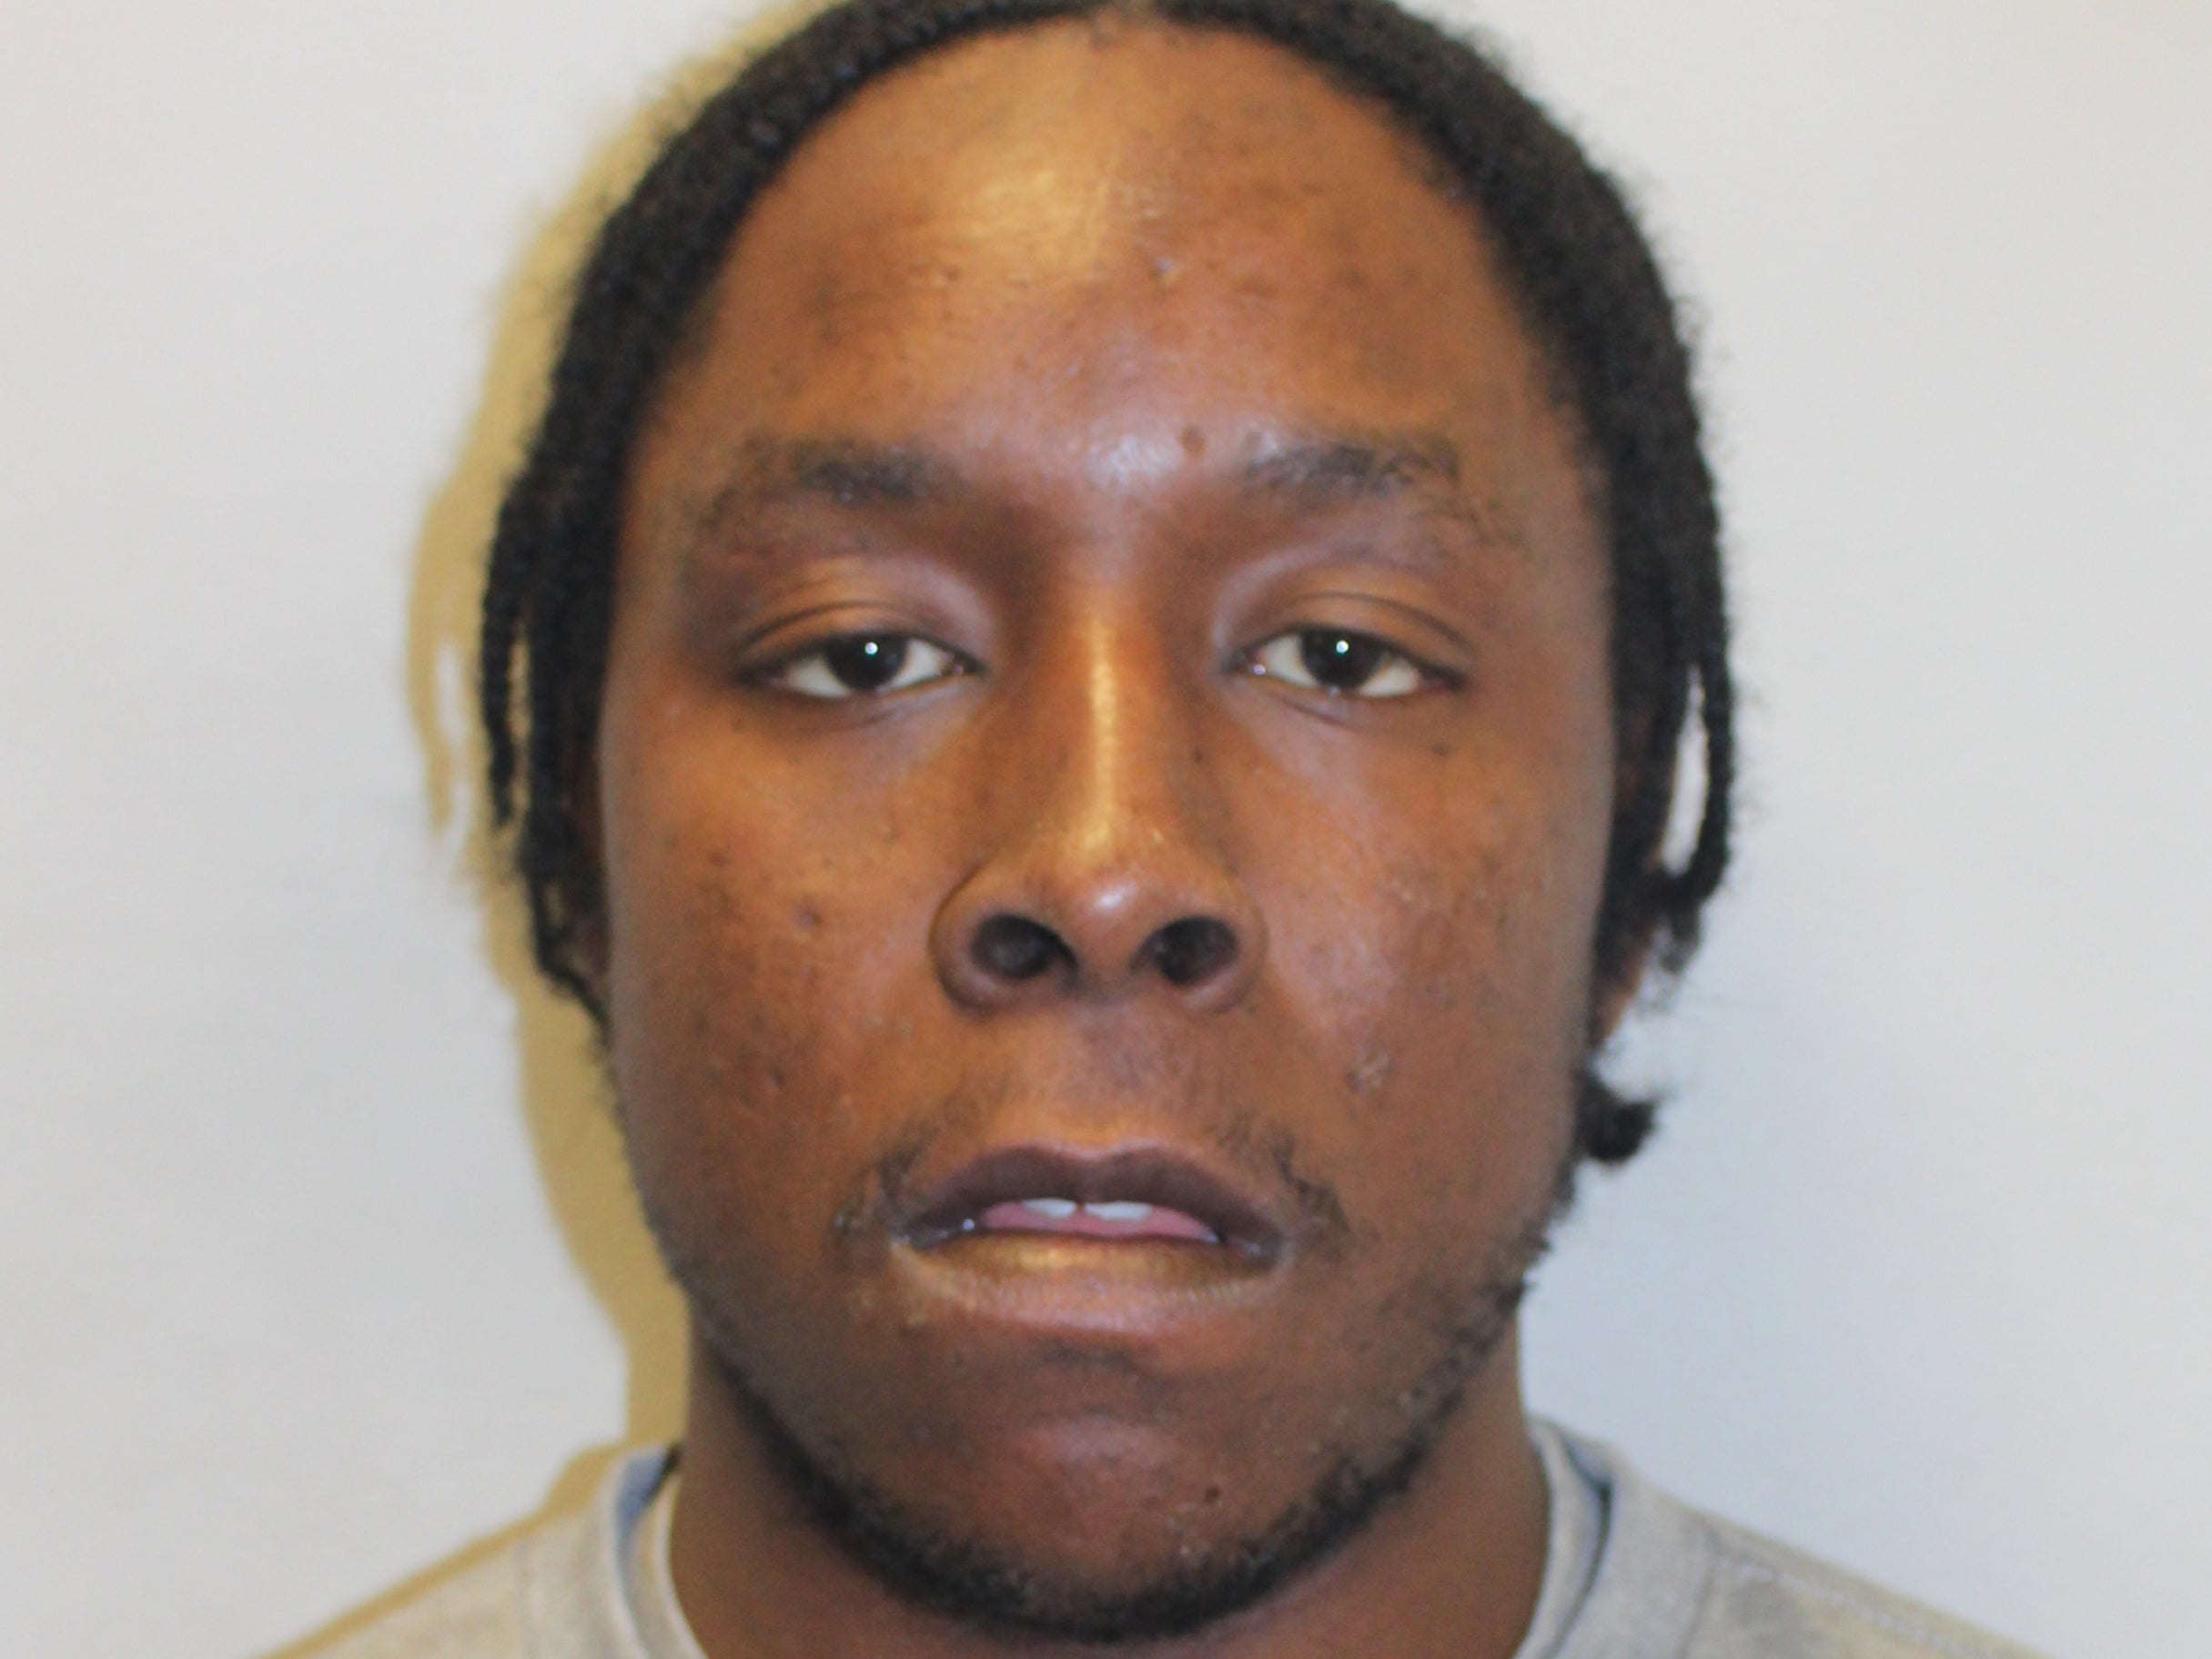 Volatile cannabis abuser Joshua Jacques, 29, was on probation when he attacked a family with a knife in their home in Bermondsey, south London, early on 25 April 2022